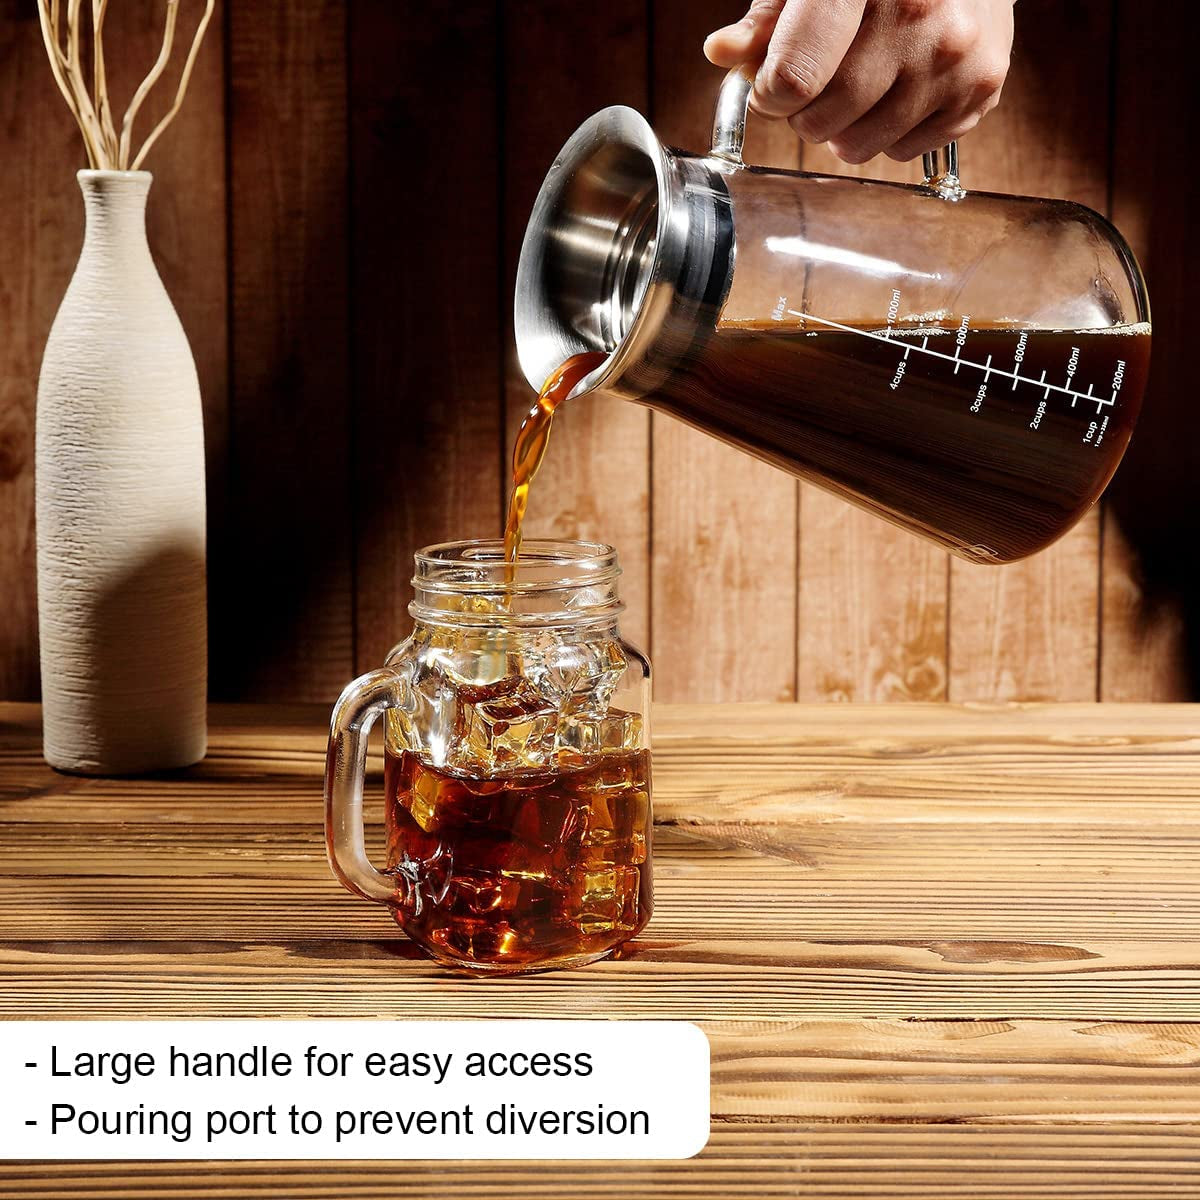 51Oz/1.5L Airtight Cold Brew Coffee (Iced Tea) Maker, BPA-Free Borosilicate Glass Pitcher, Dishwasher Safe, Spill-Proof Design, 6 Cups Capacity